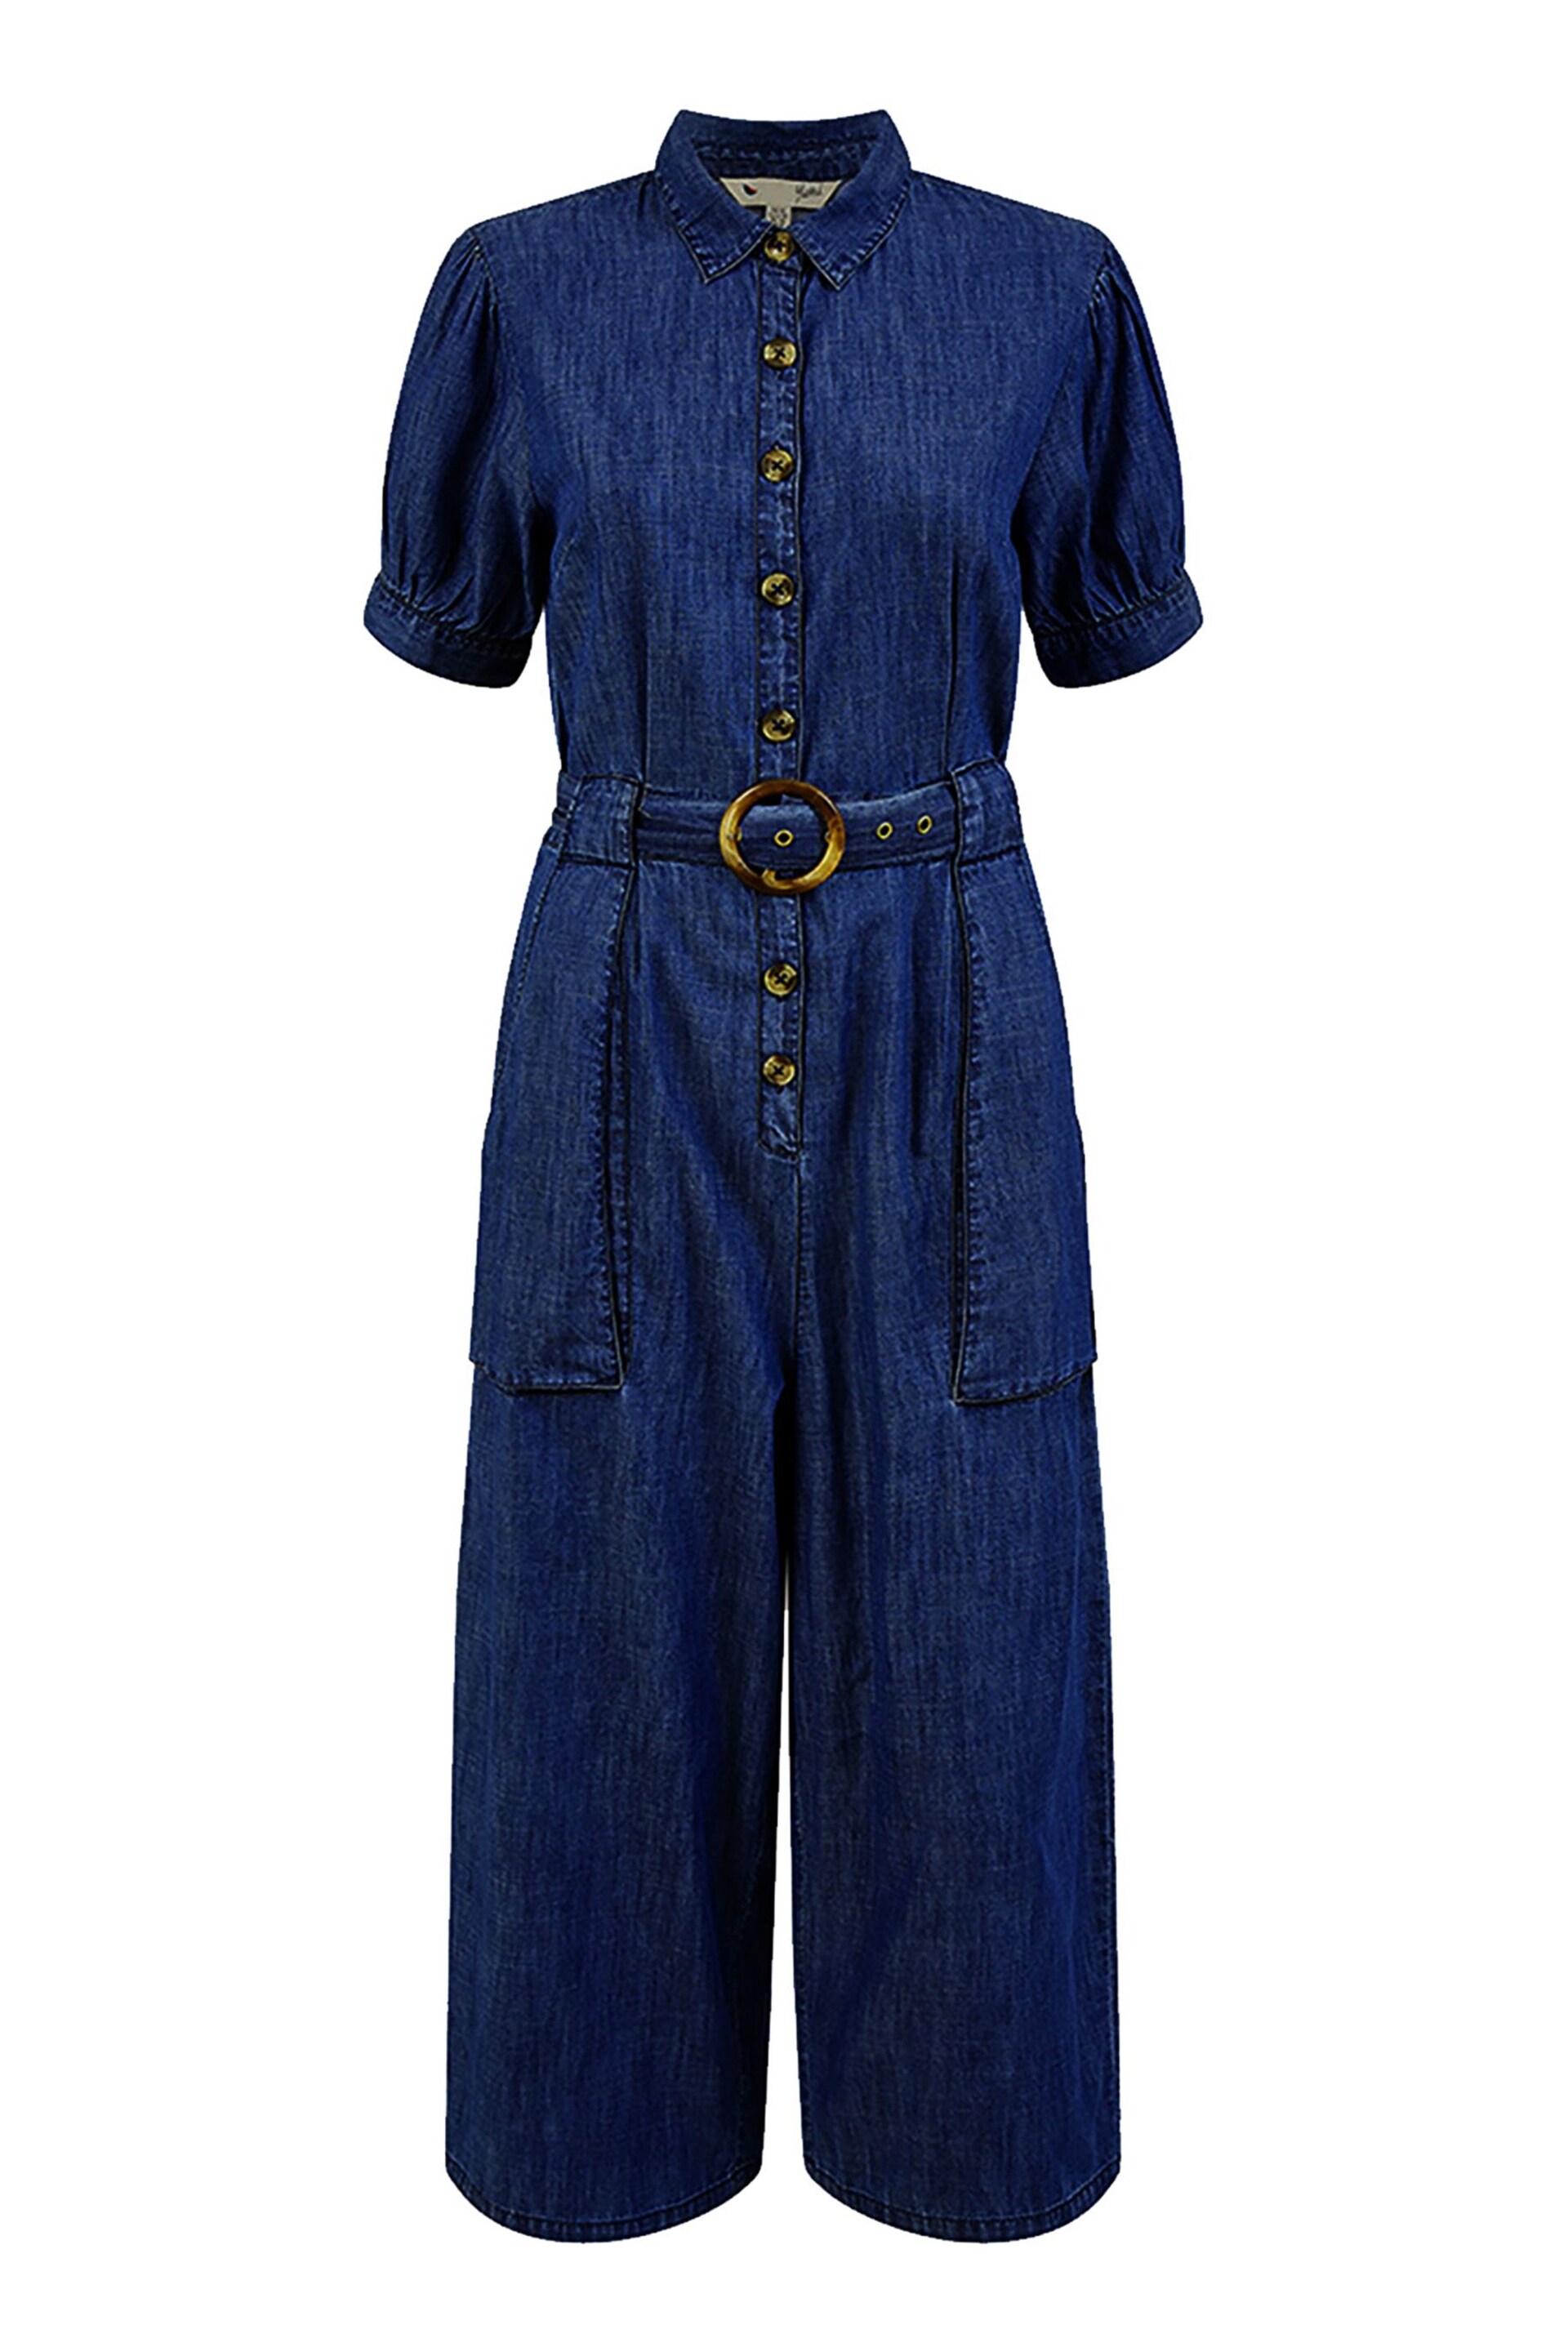 Yumi Blue Cotton Chambray Button Up Jumpsuit - Image 4 of 4